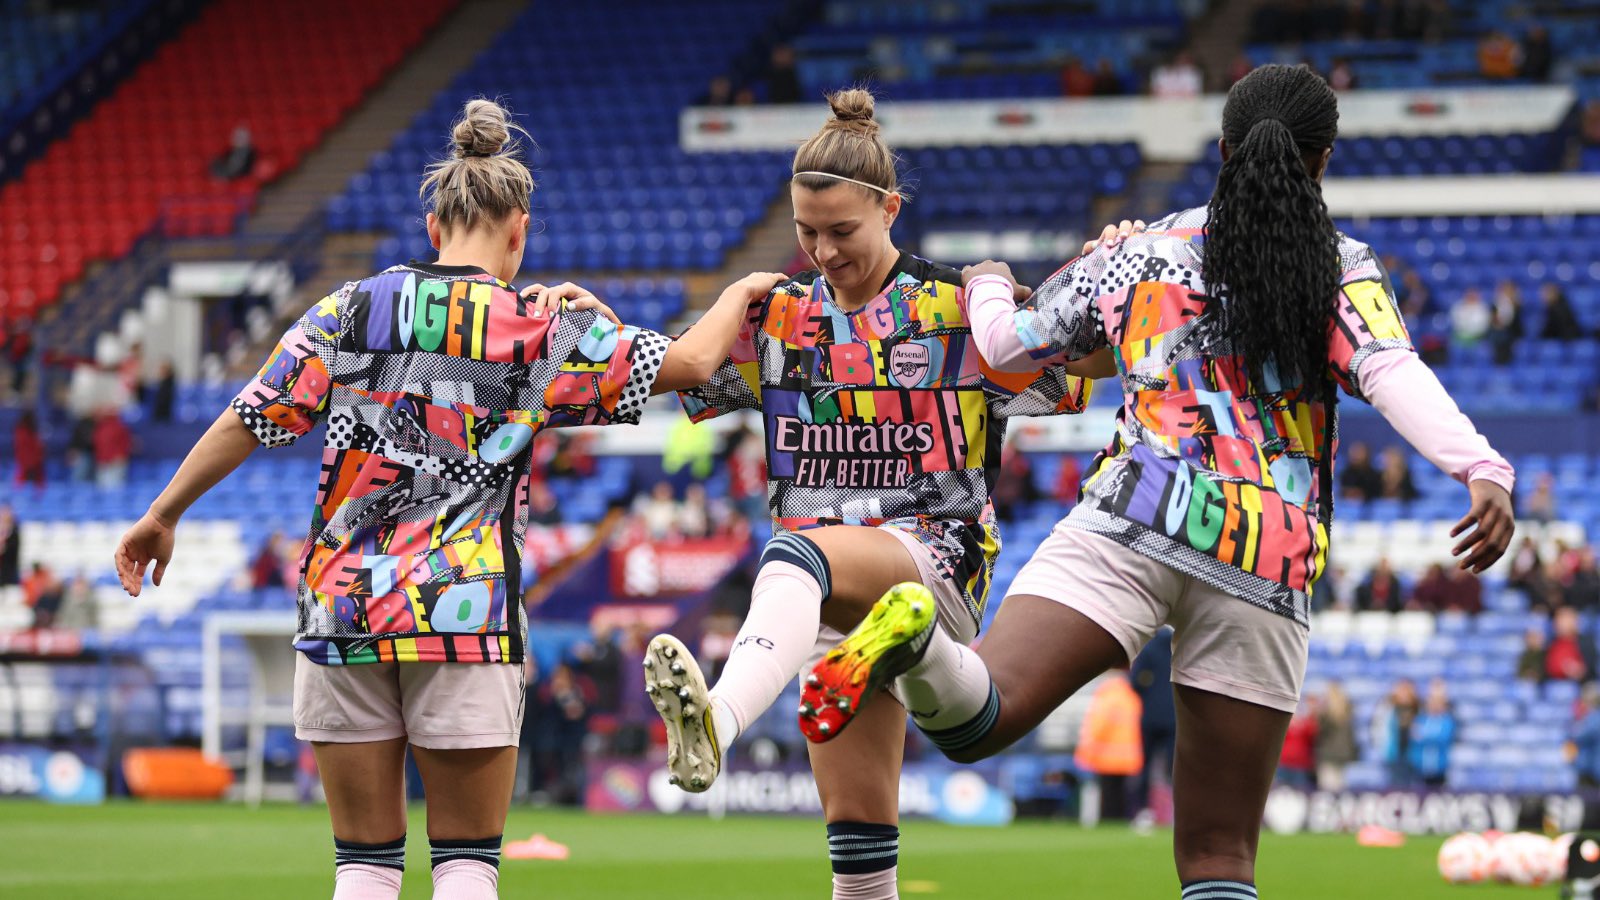 Arsenal Women will be given new training kit this season after